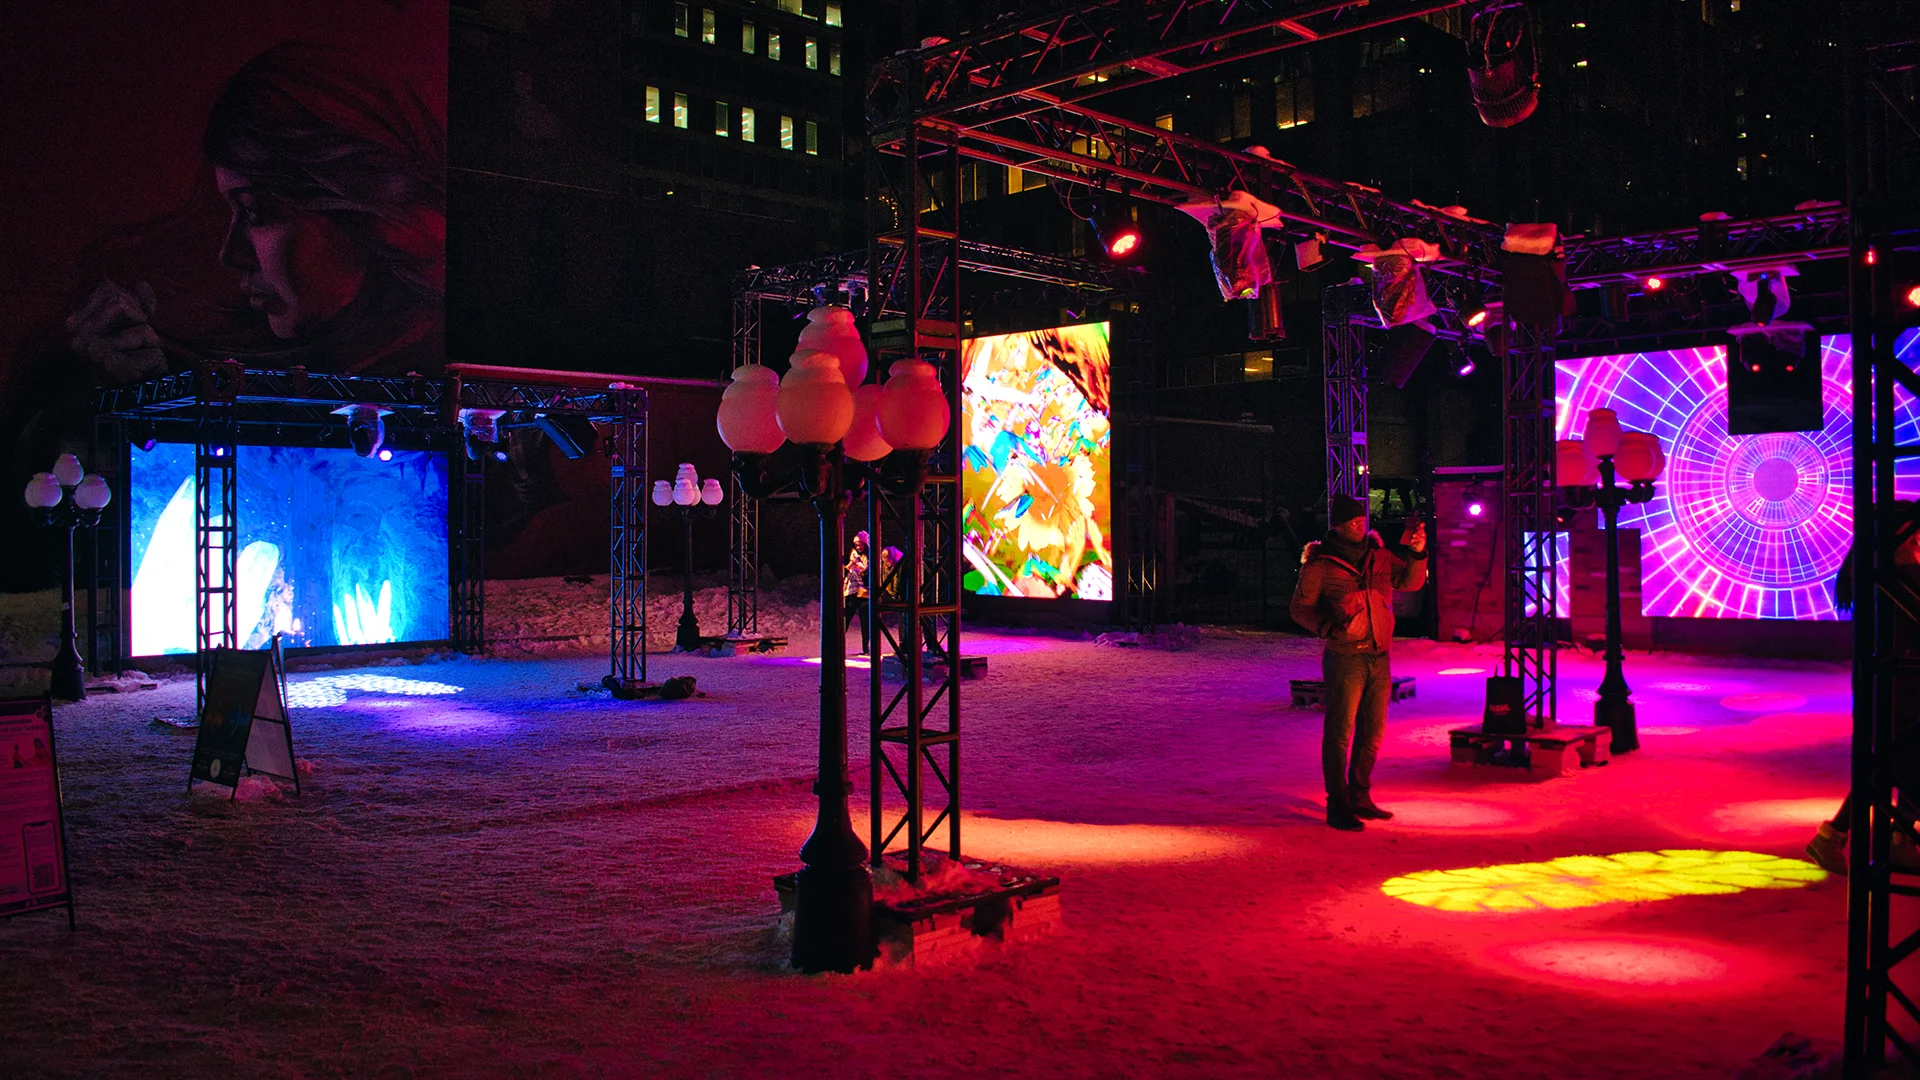 OSE Event Portfolio Photos - Fire and Ice Festival - Bank Street BIA - Outdoor Video Wall Displays